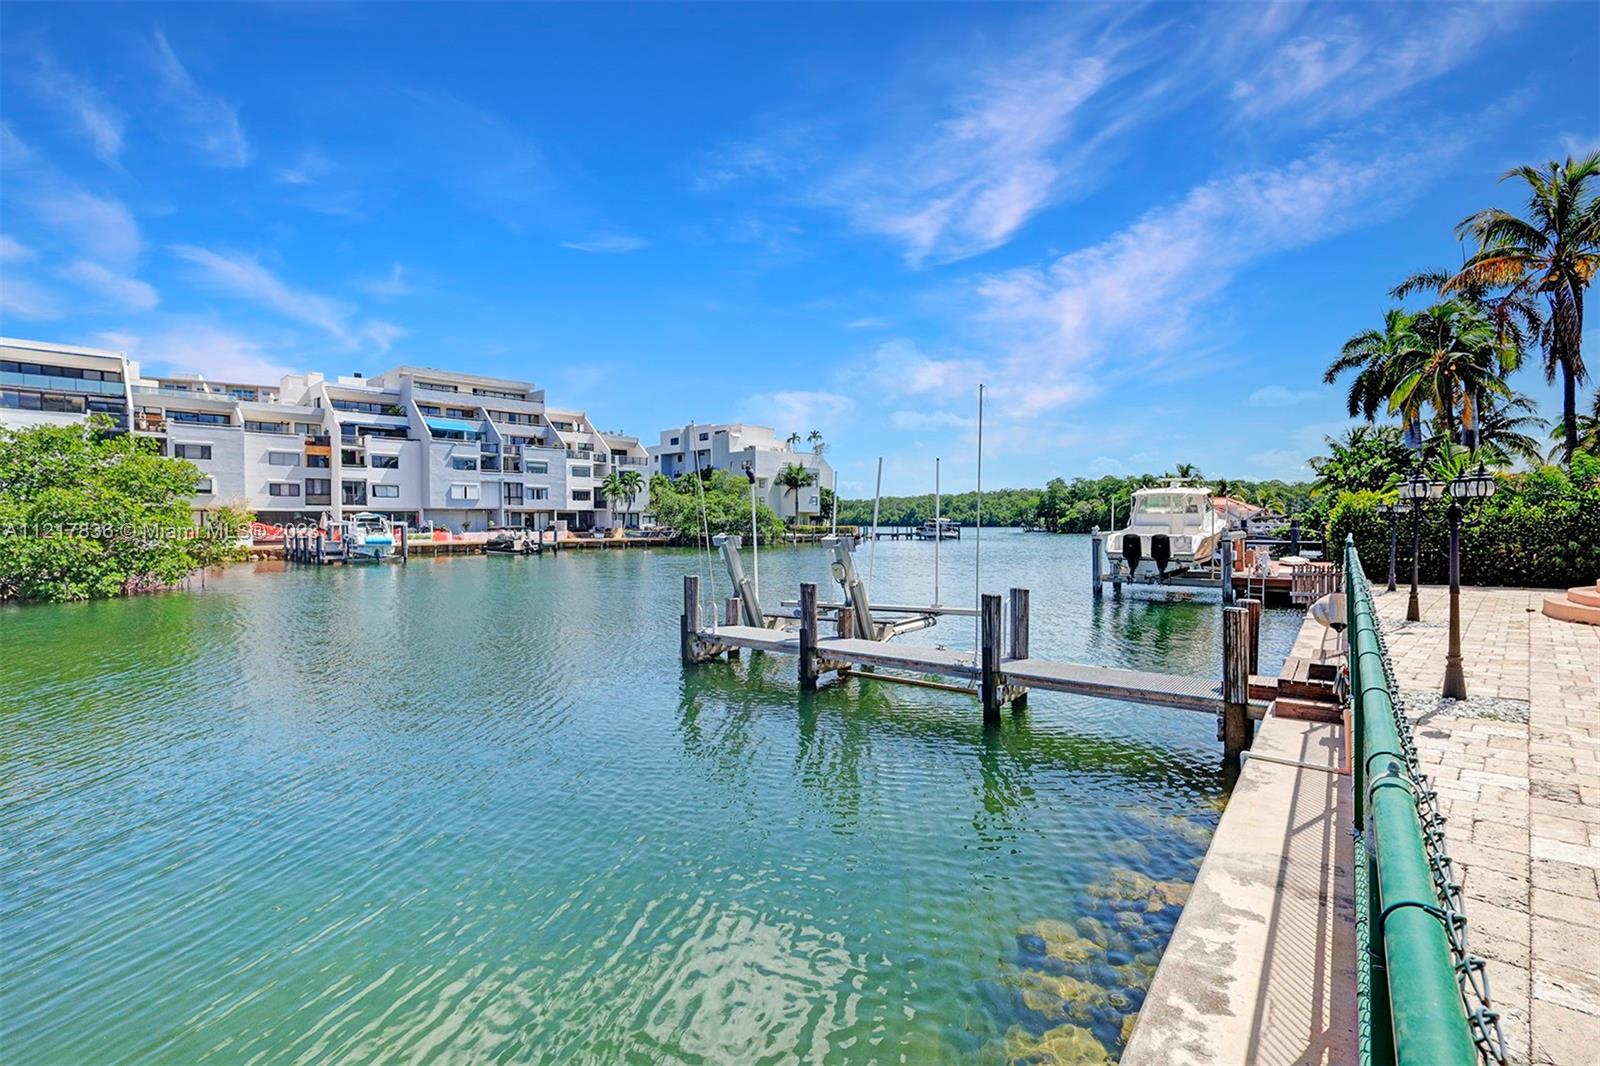 MOTIVATED SELLER -  just reduced! Waterfront Two Story House on the Island of Sunny isles. Only 54 custom made homes community. Fast access to the Beach. 6b/6b, master bedroom on the second floor, elevator & 22-foot-high ceiling. High end appliances. Customized home theater with 7.1 surround sound system. Impact doors & windows. Travertine marble throughout. Steam room & sauna inside the home. Heated pool & Jacuzzi. Waterfront 90 feet on the Intracoastal water and sits on oversized lot of 14,500 sq.ft. w/private/deeded beach access. BBQ and fish cleaning station, Mango Guava and Avocado trees on back yard. Pier/dock has updated automatic boat lift, direct ocean access no bridges. Minutes away from Haulover park. Pre-qualified buyers only. Easy to view.